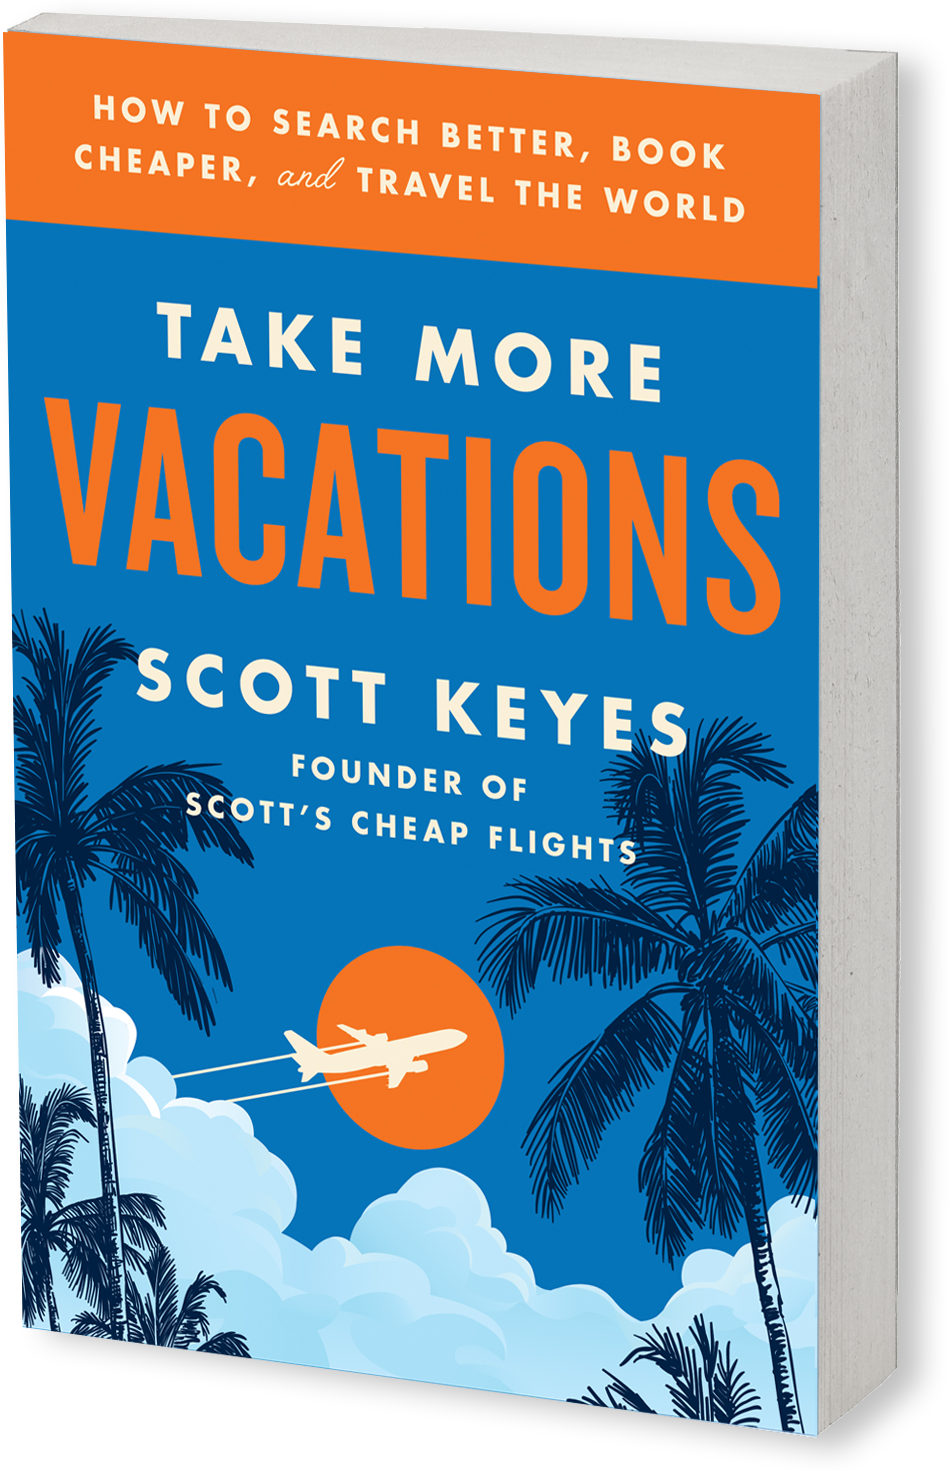 Take More Vacations: How to Search Better, Book Cheaper, and Travel the World.